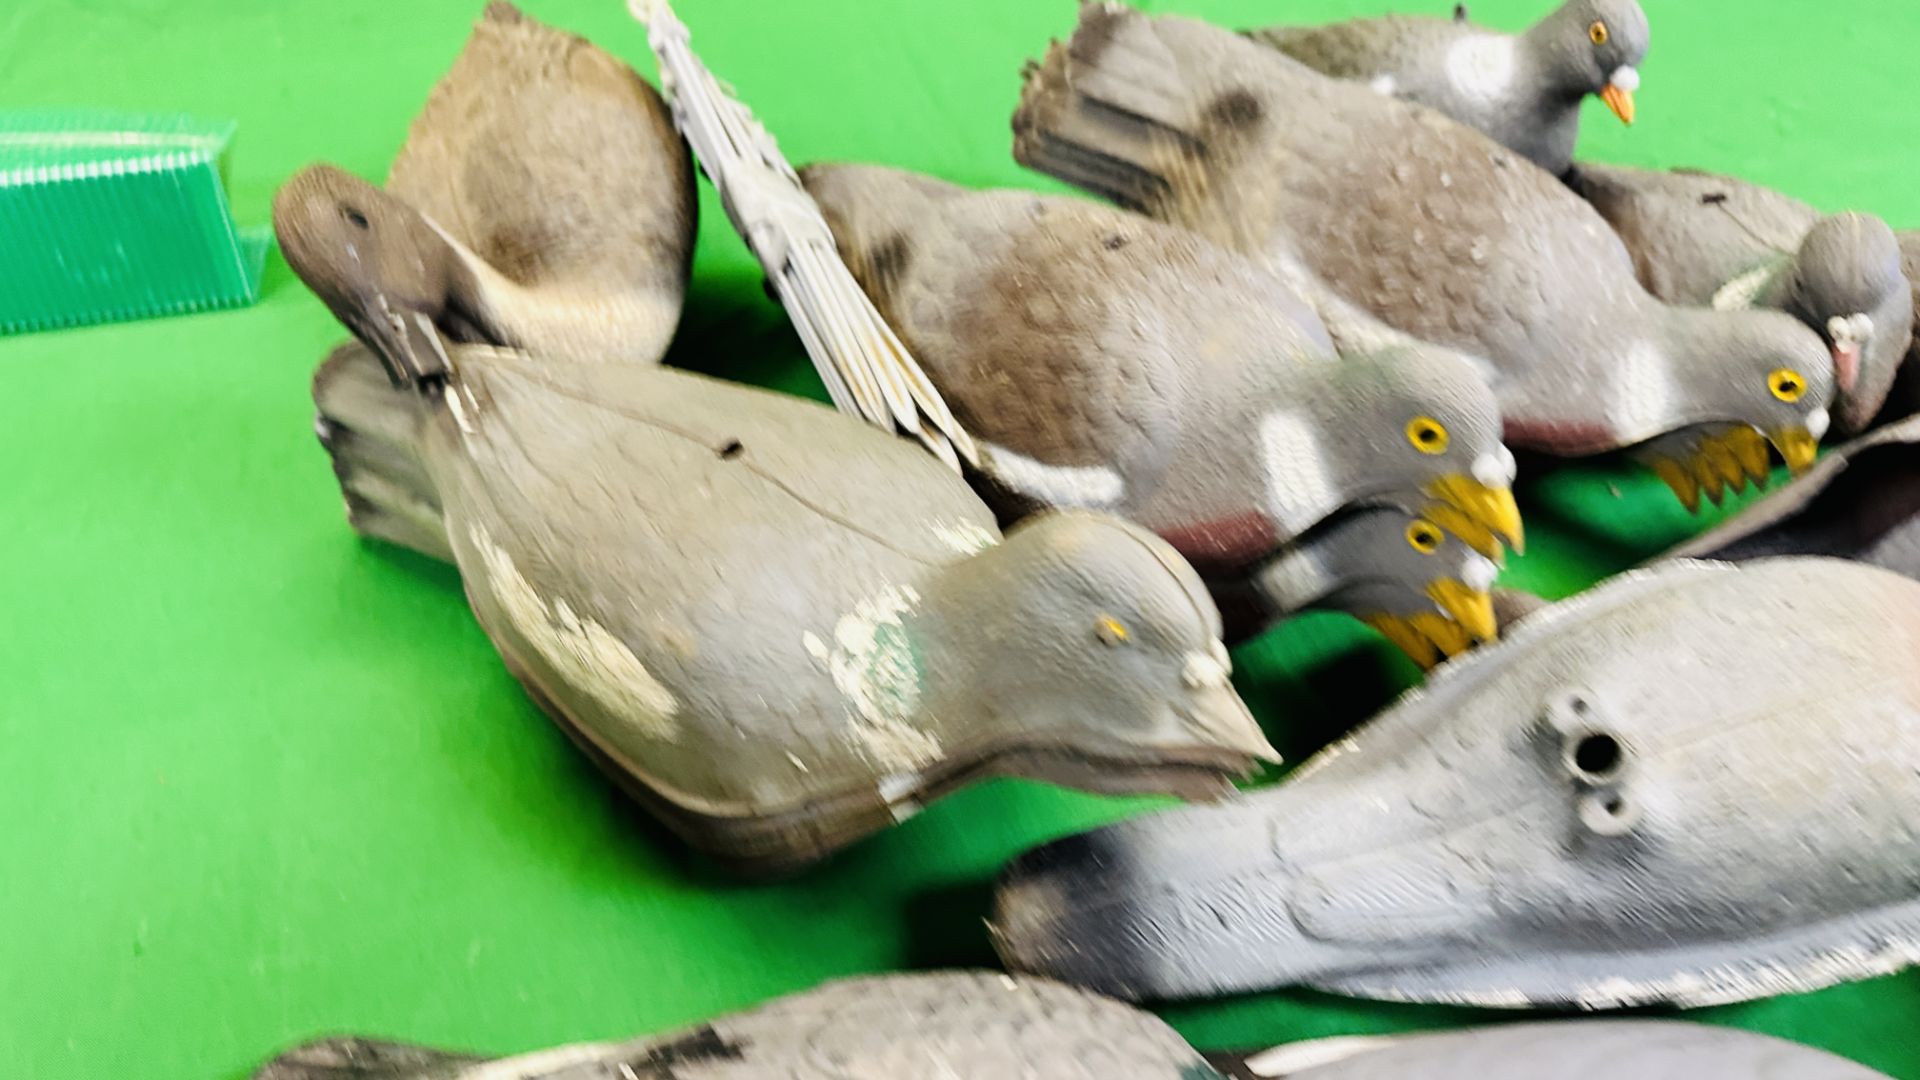 TWO BOXES OF VARIOUS PIGEON DECOYS AND DECOY DUCK. - Image 3 of 9